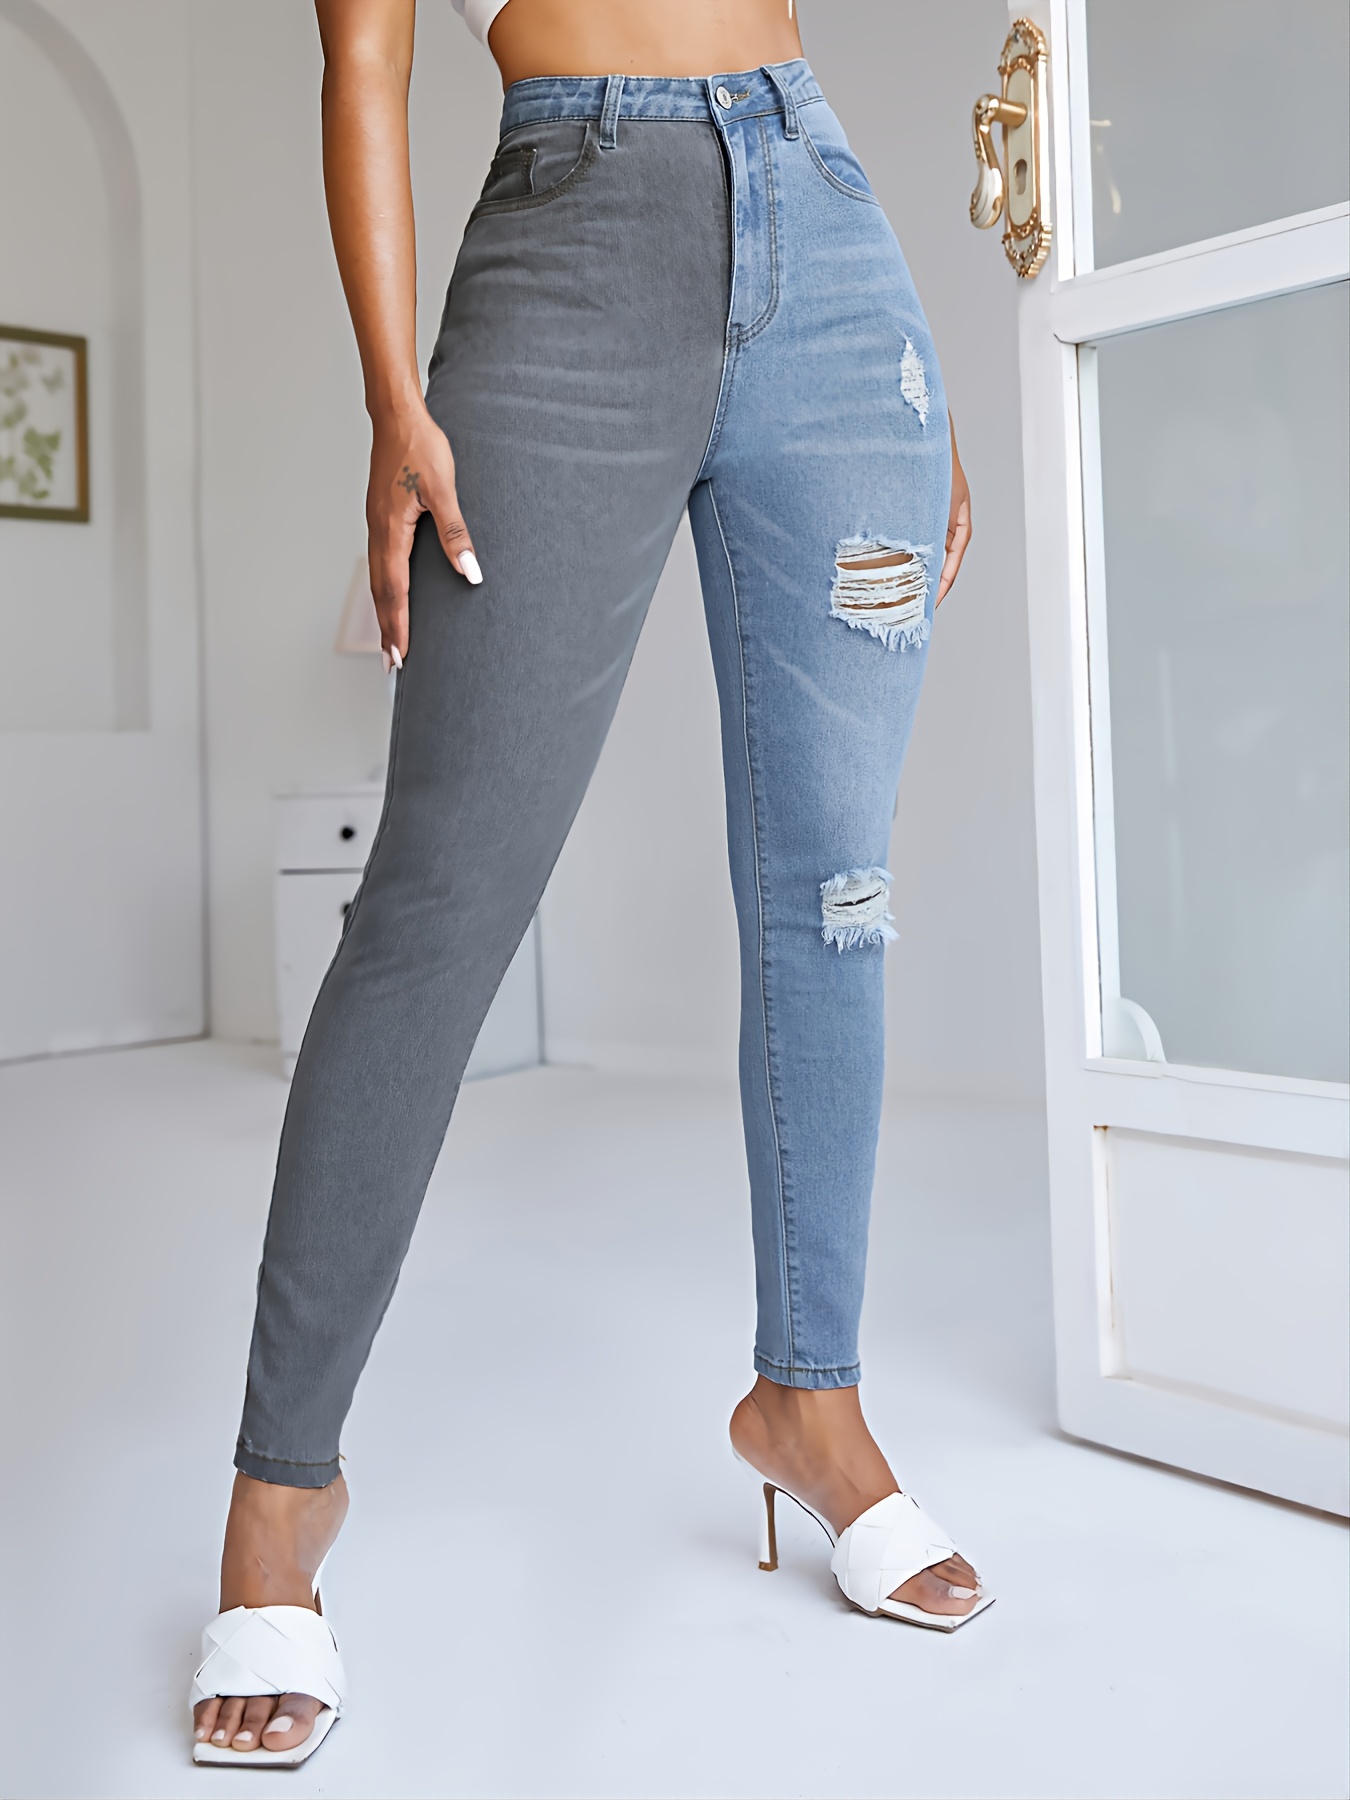 High Waist Two Tone Jeans Without Belt | SHEIN UK